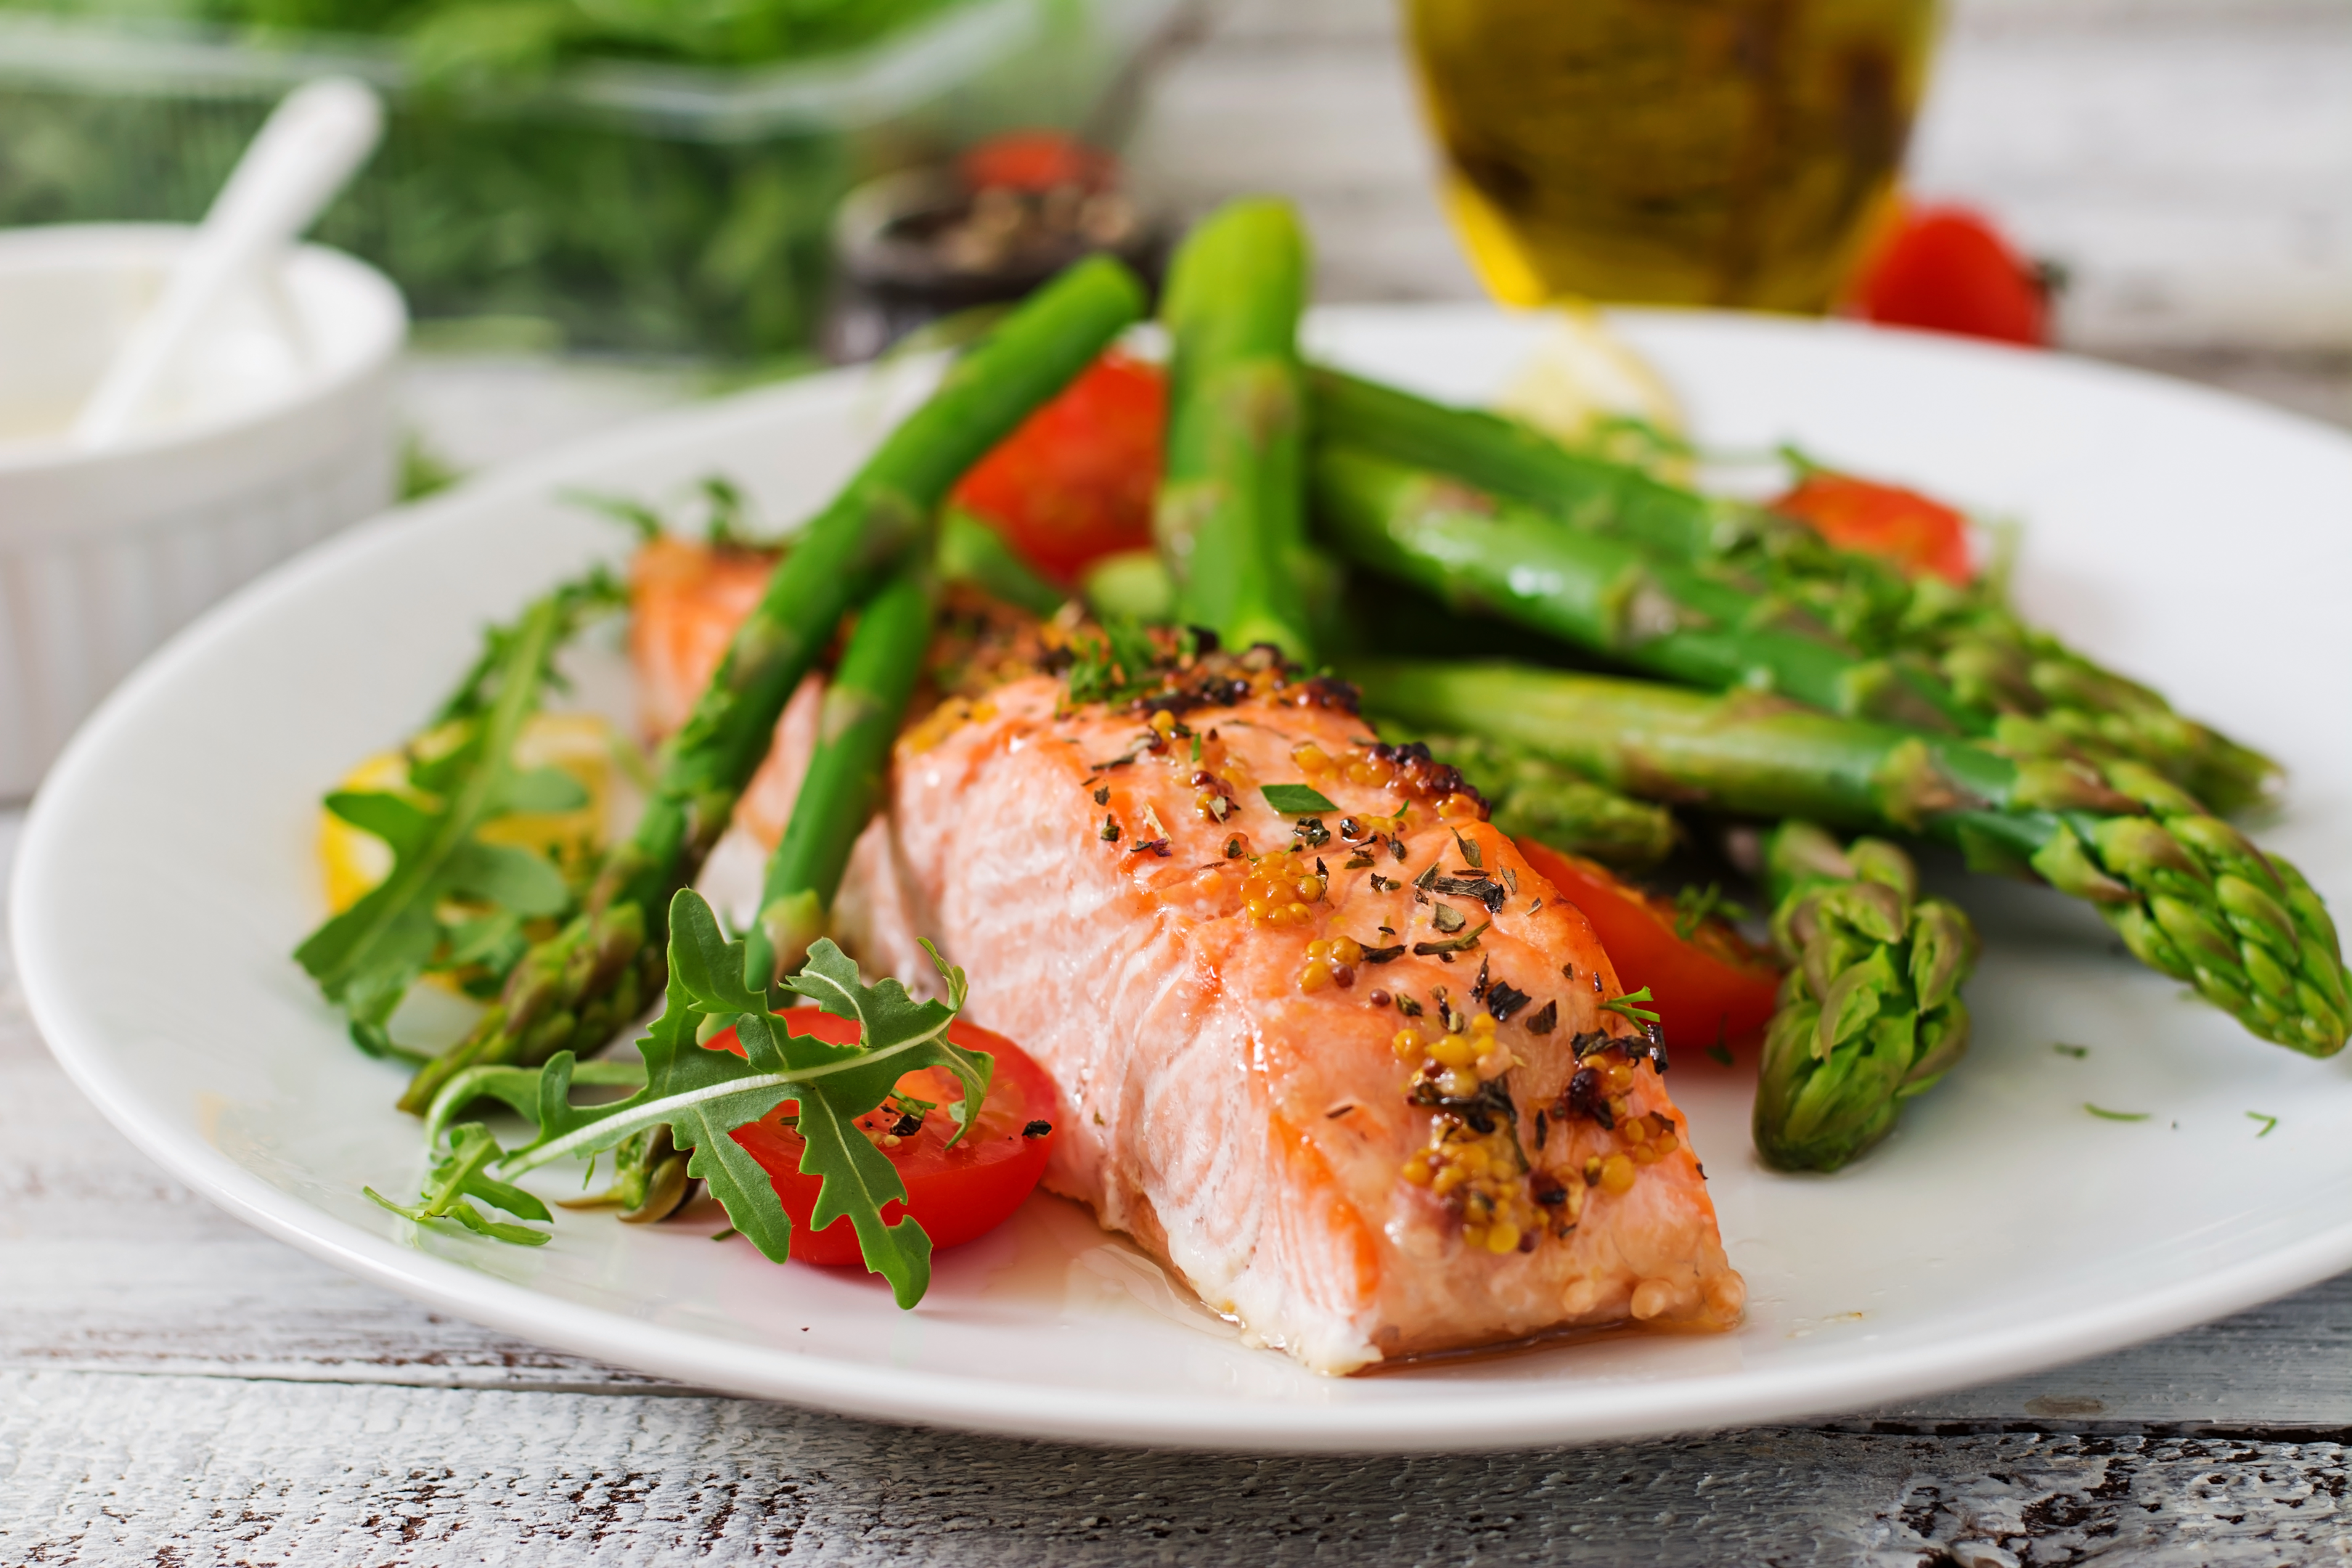 Salmon is not only delicious but also very healthy food.